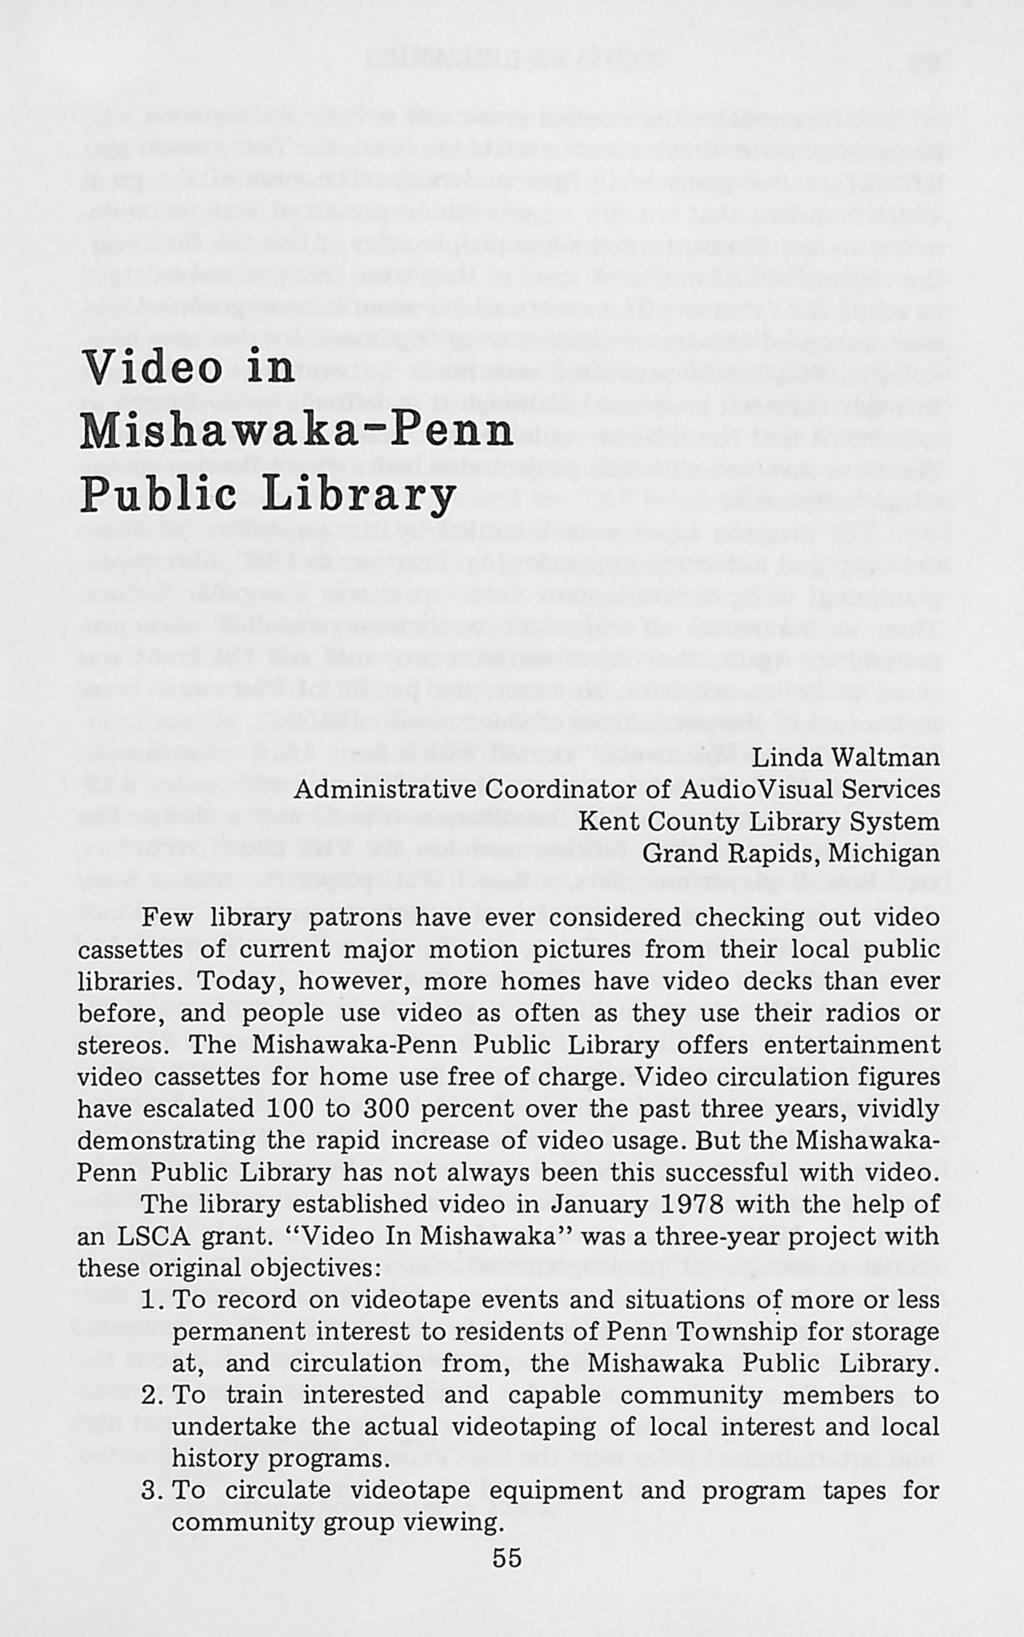 Video in Mishawaka-Penn Public Library Linda Waltman Administrative Coordinator of Audio Visual Services Kent County Library System Grand Rapids, Michigan Few library patrons have ever considered